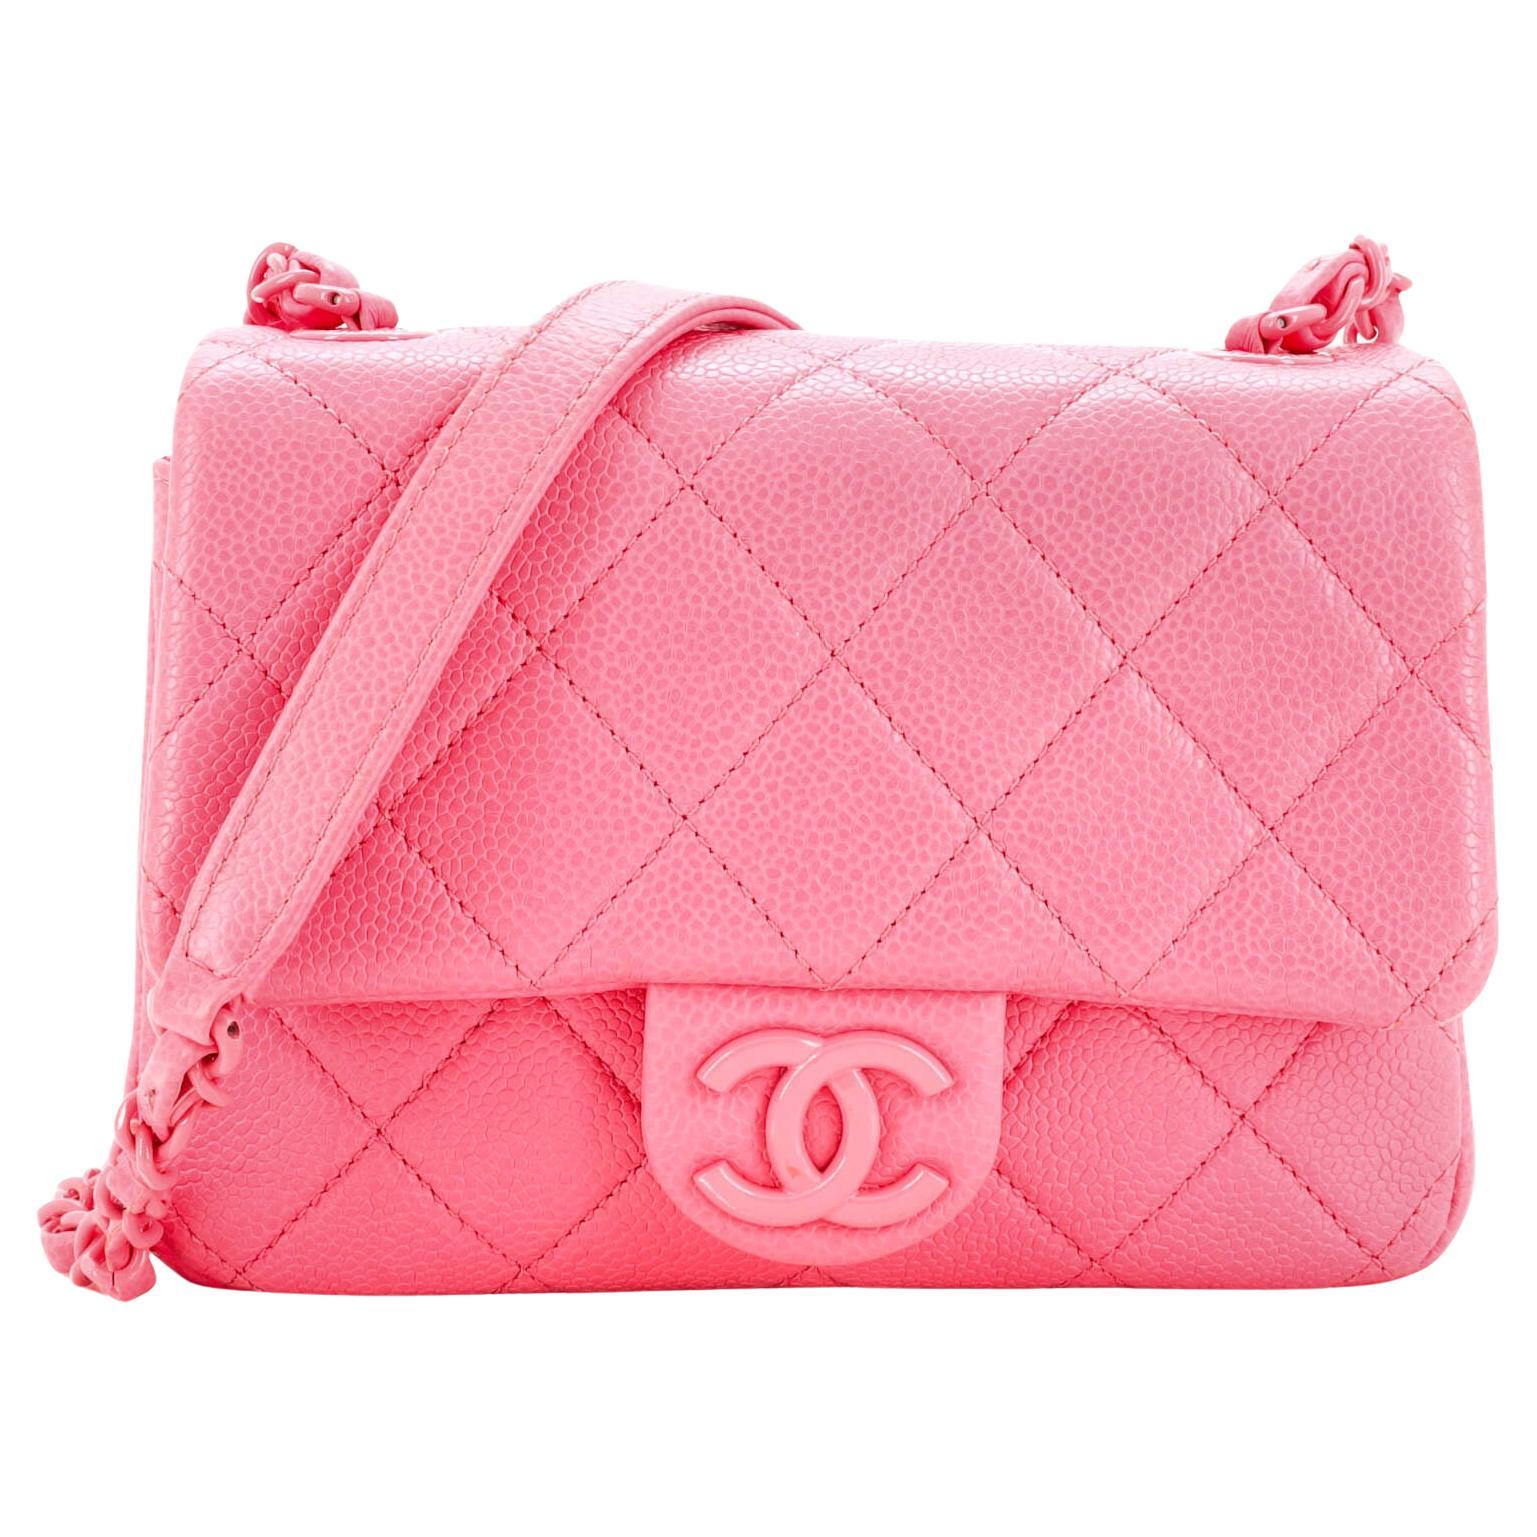 Chanel Pre-owned 2006 Mini Square Classic Flap Shoulder Bag - Pink